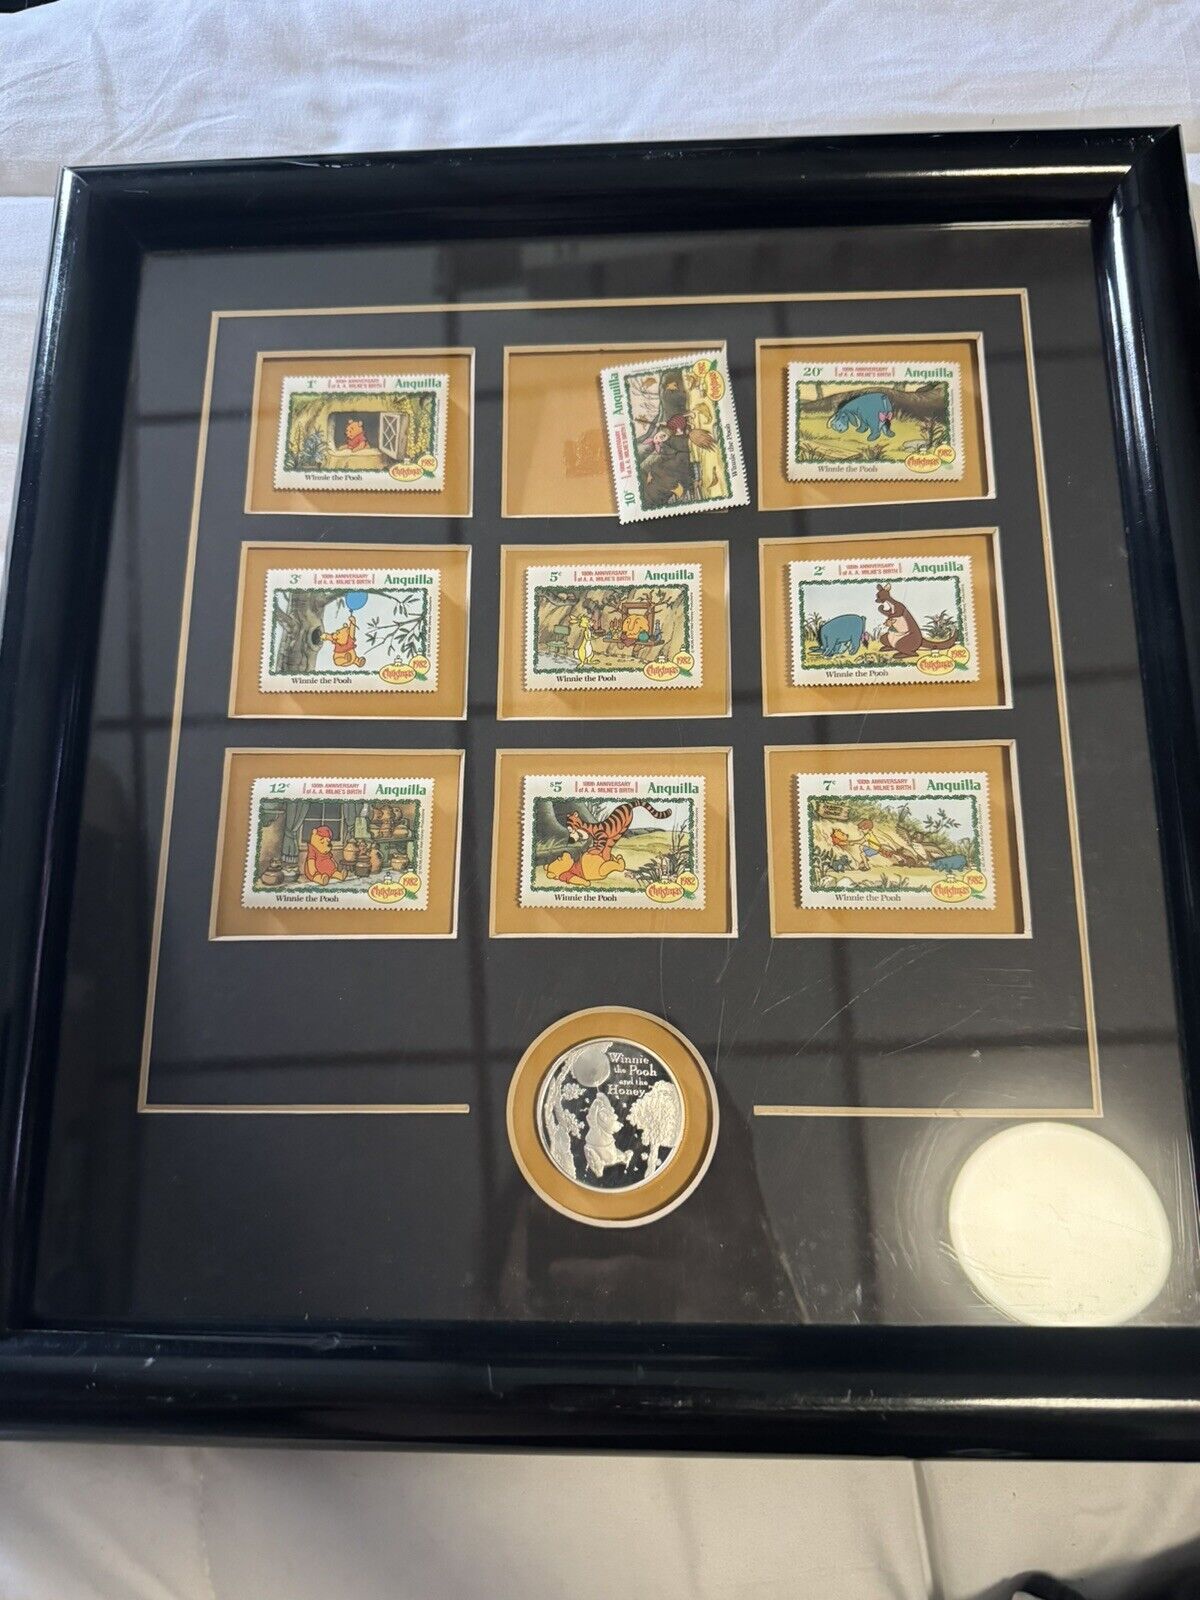 Disney “Pooh and Friends” Framed Stamps and Medallion Limited Edition of 2500